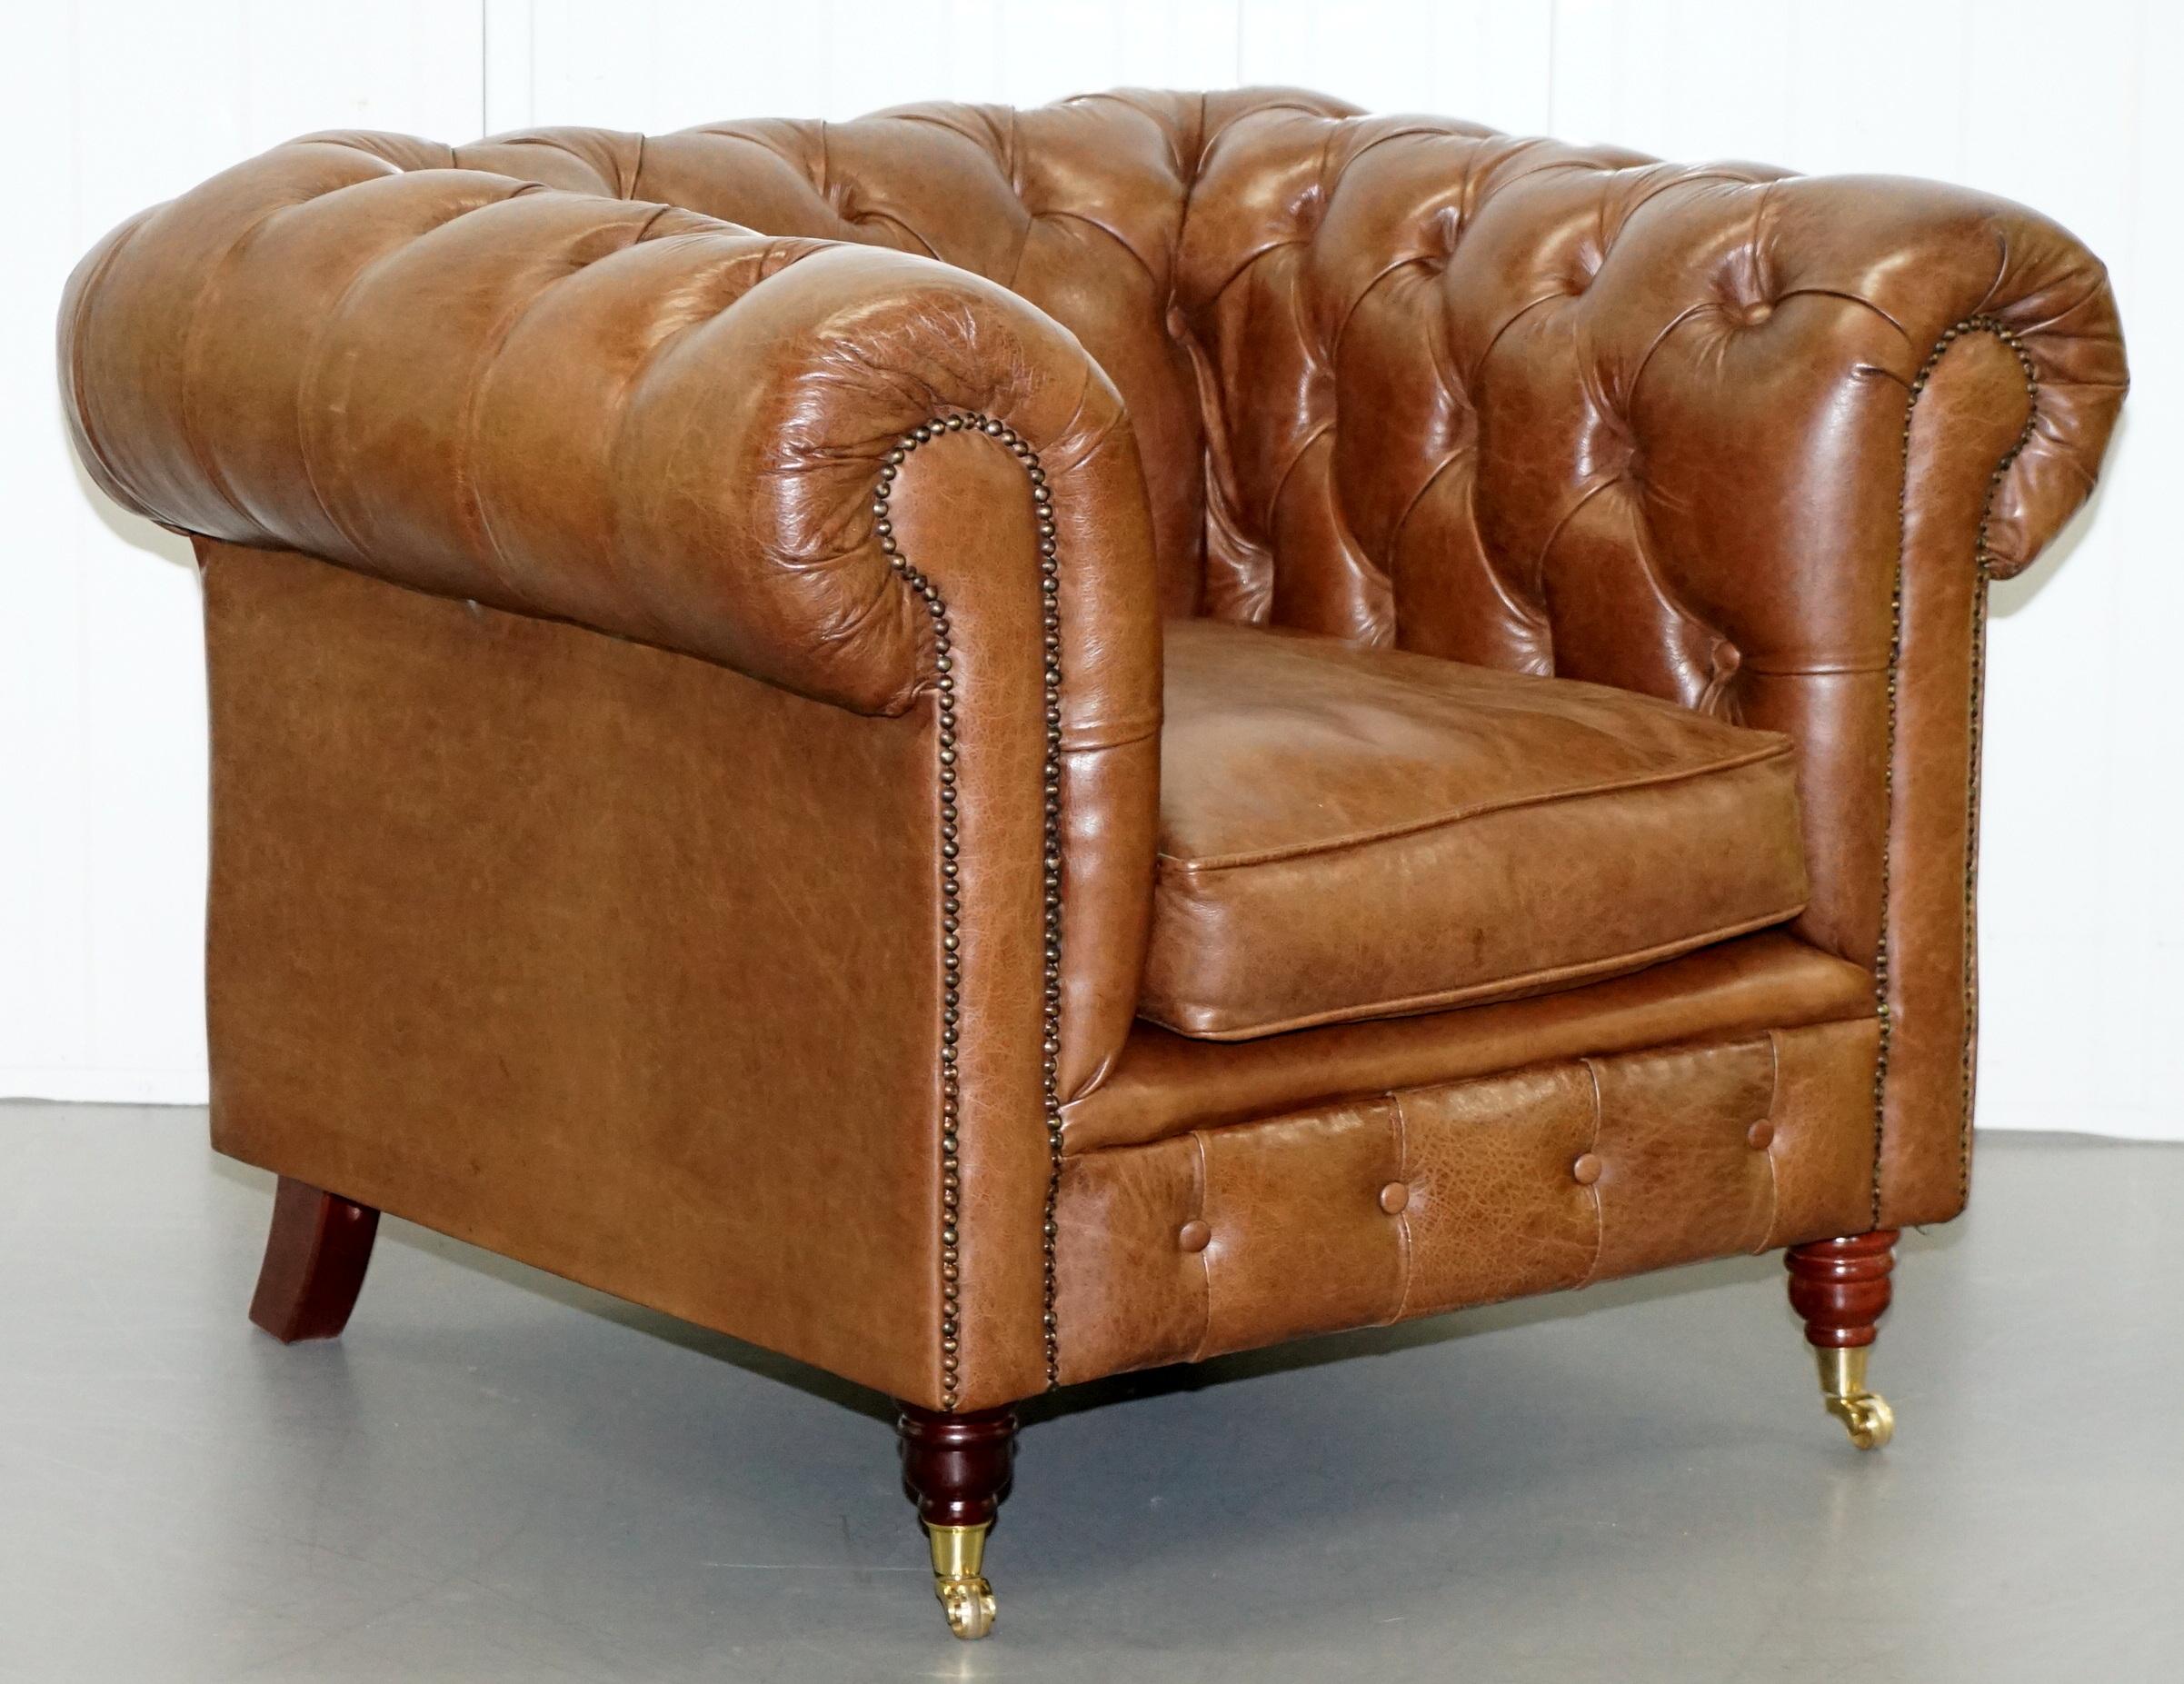 Chesterfield Heritage Brown Leather Sofas & Armchair Suite 2-3 3-4 Seat Sofas 8